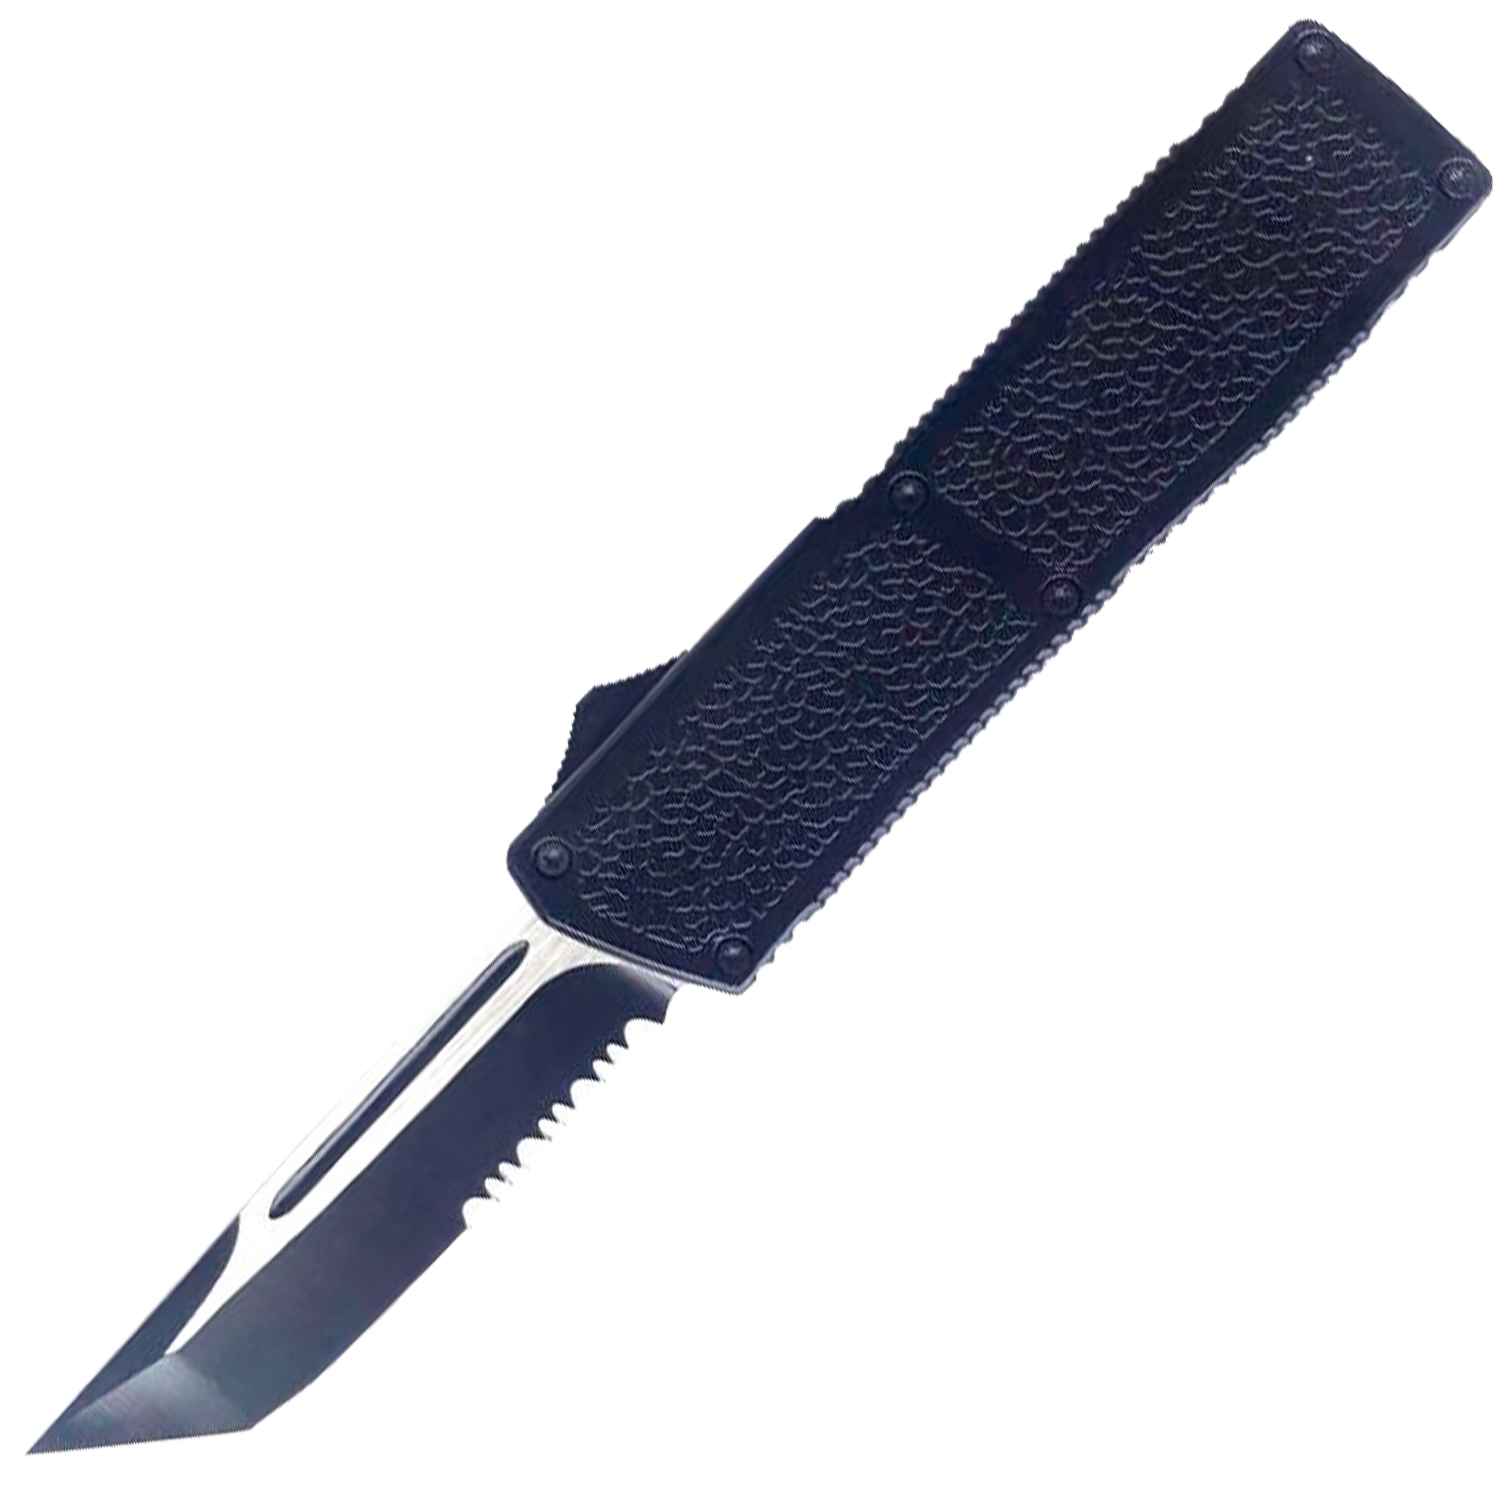 Lighting Action Assisted Knife Jet Black Two Toned Tanto